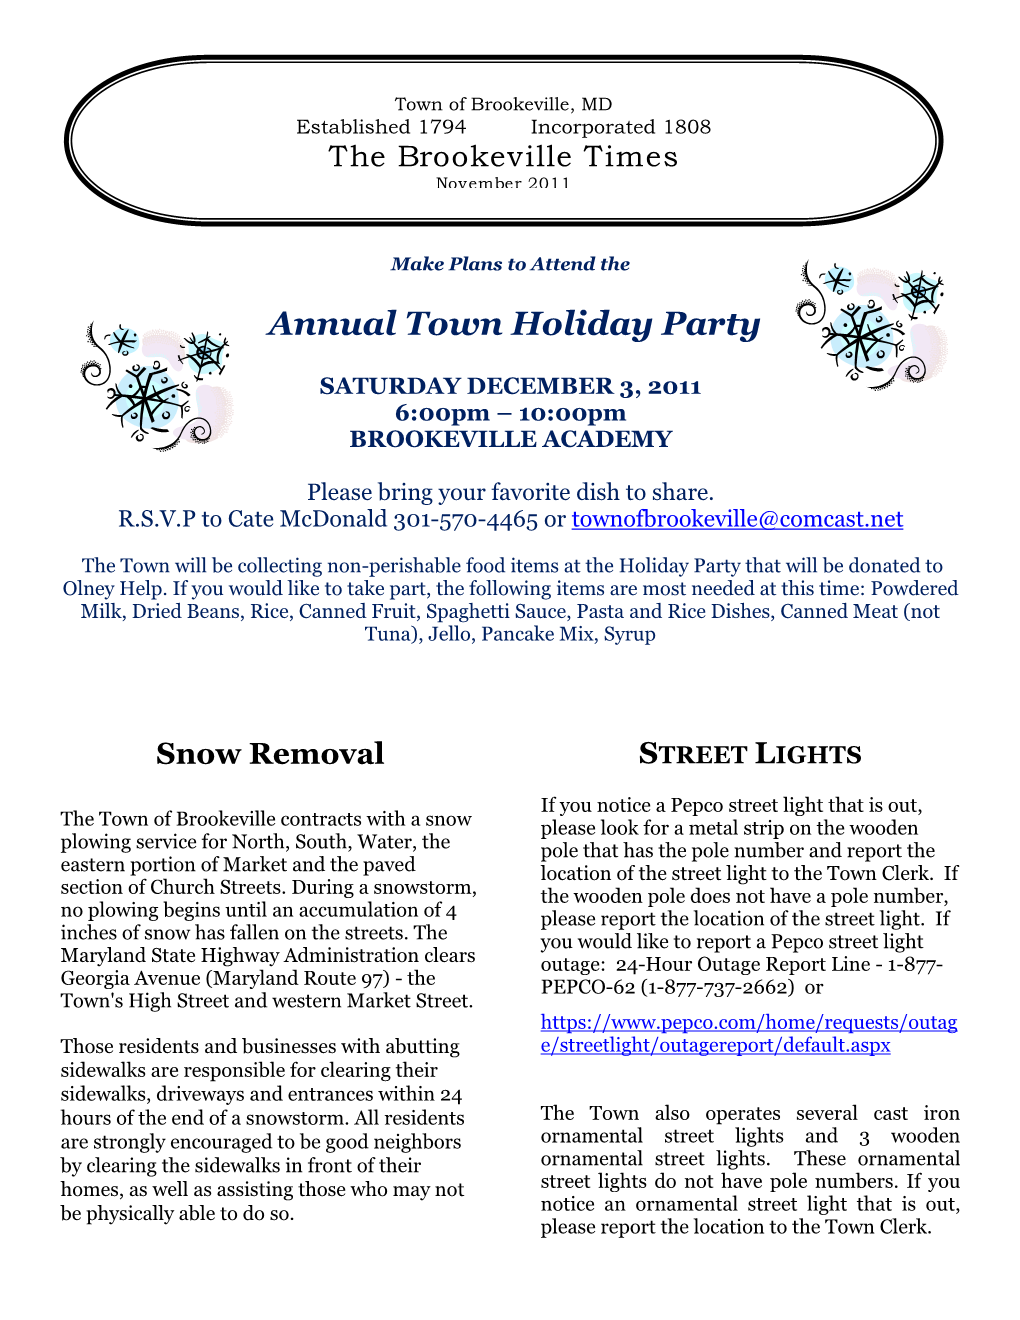 Annual Town Holiday Party